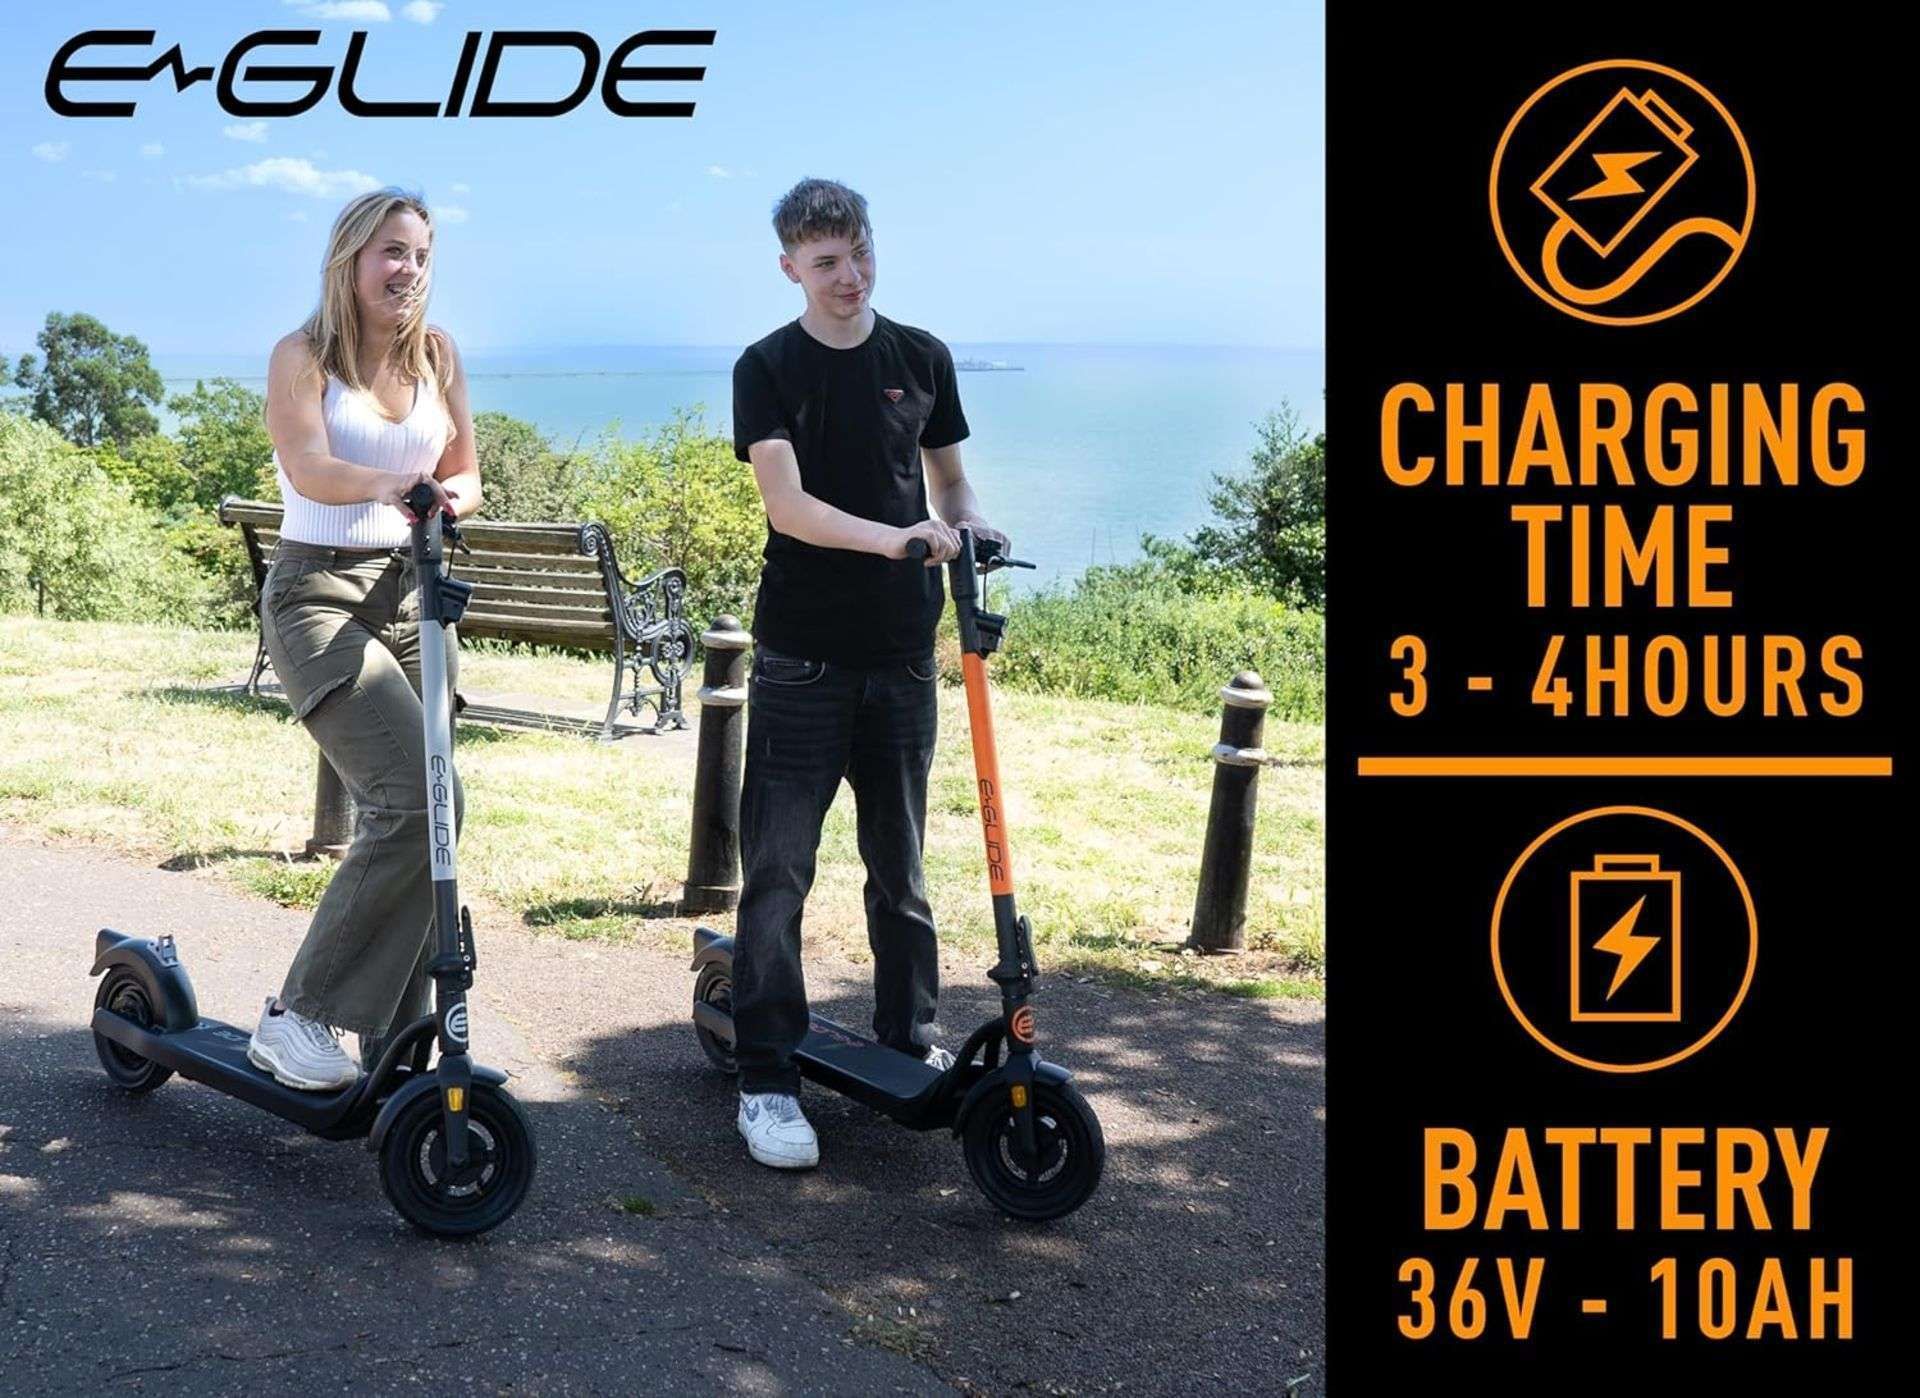 Brand New E-Glide V2 Electric Scooter Grey and Black RRP £599, Introducing a sleek and efficient - Image 4 of 4